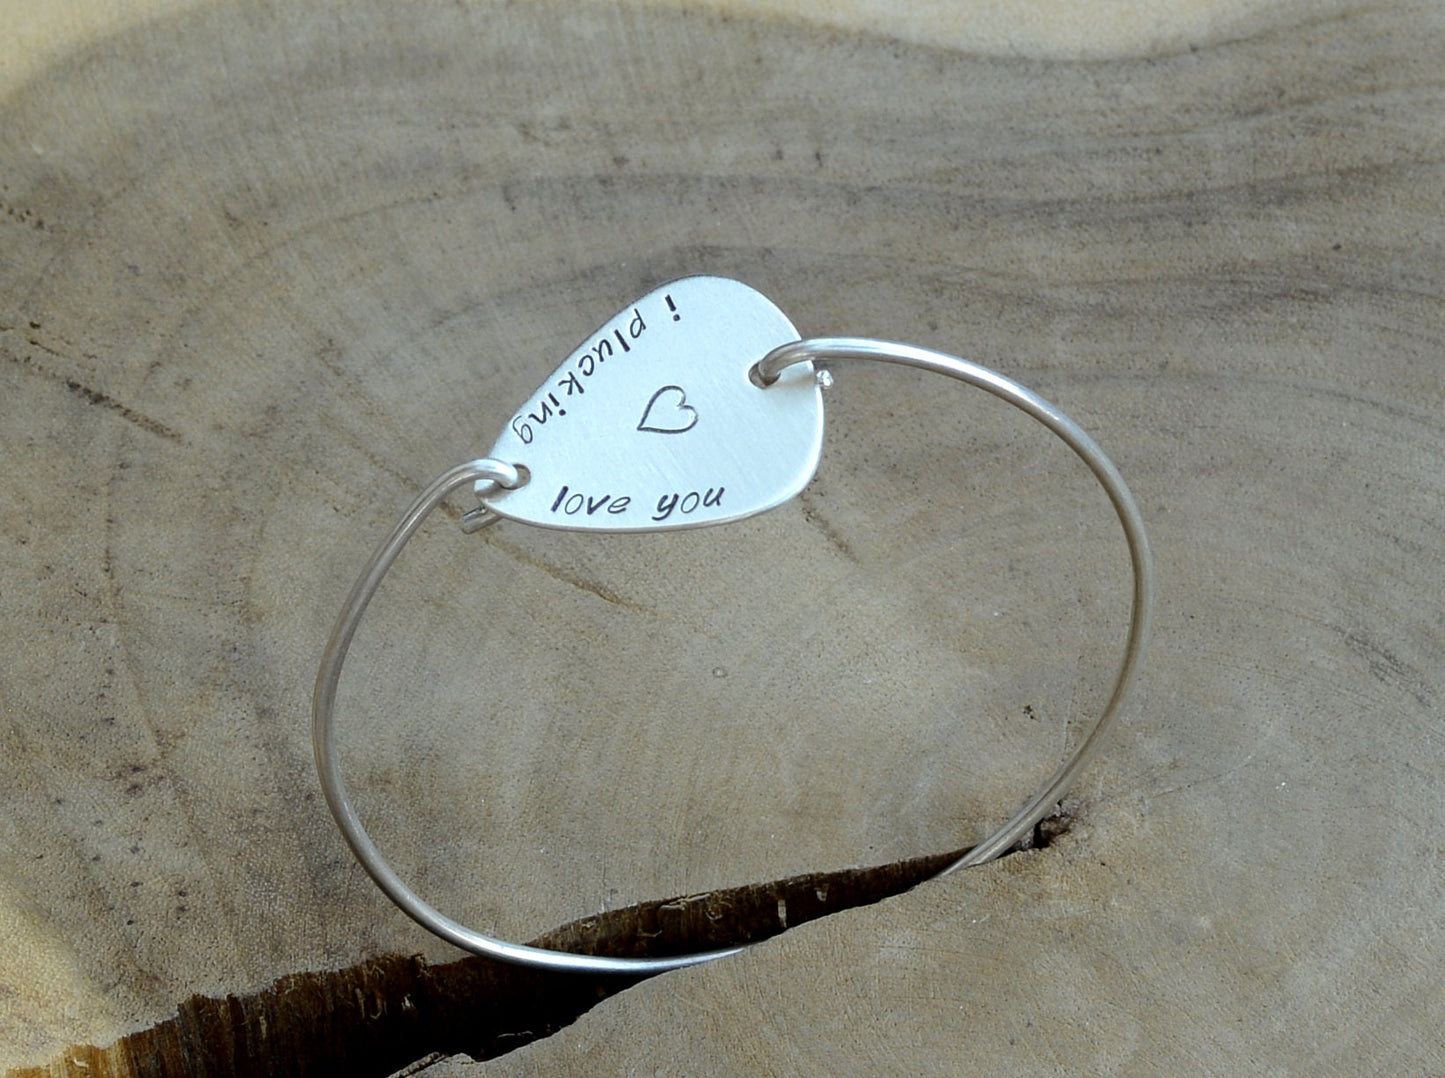 I plucking love you guitar pick set in a sterling silver tension bangle